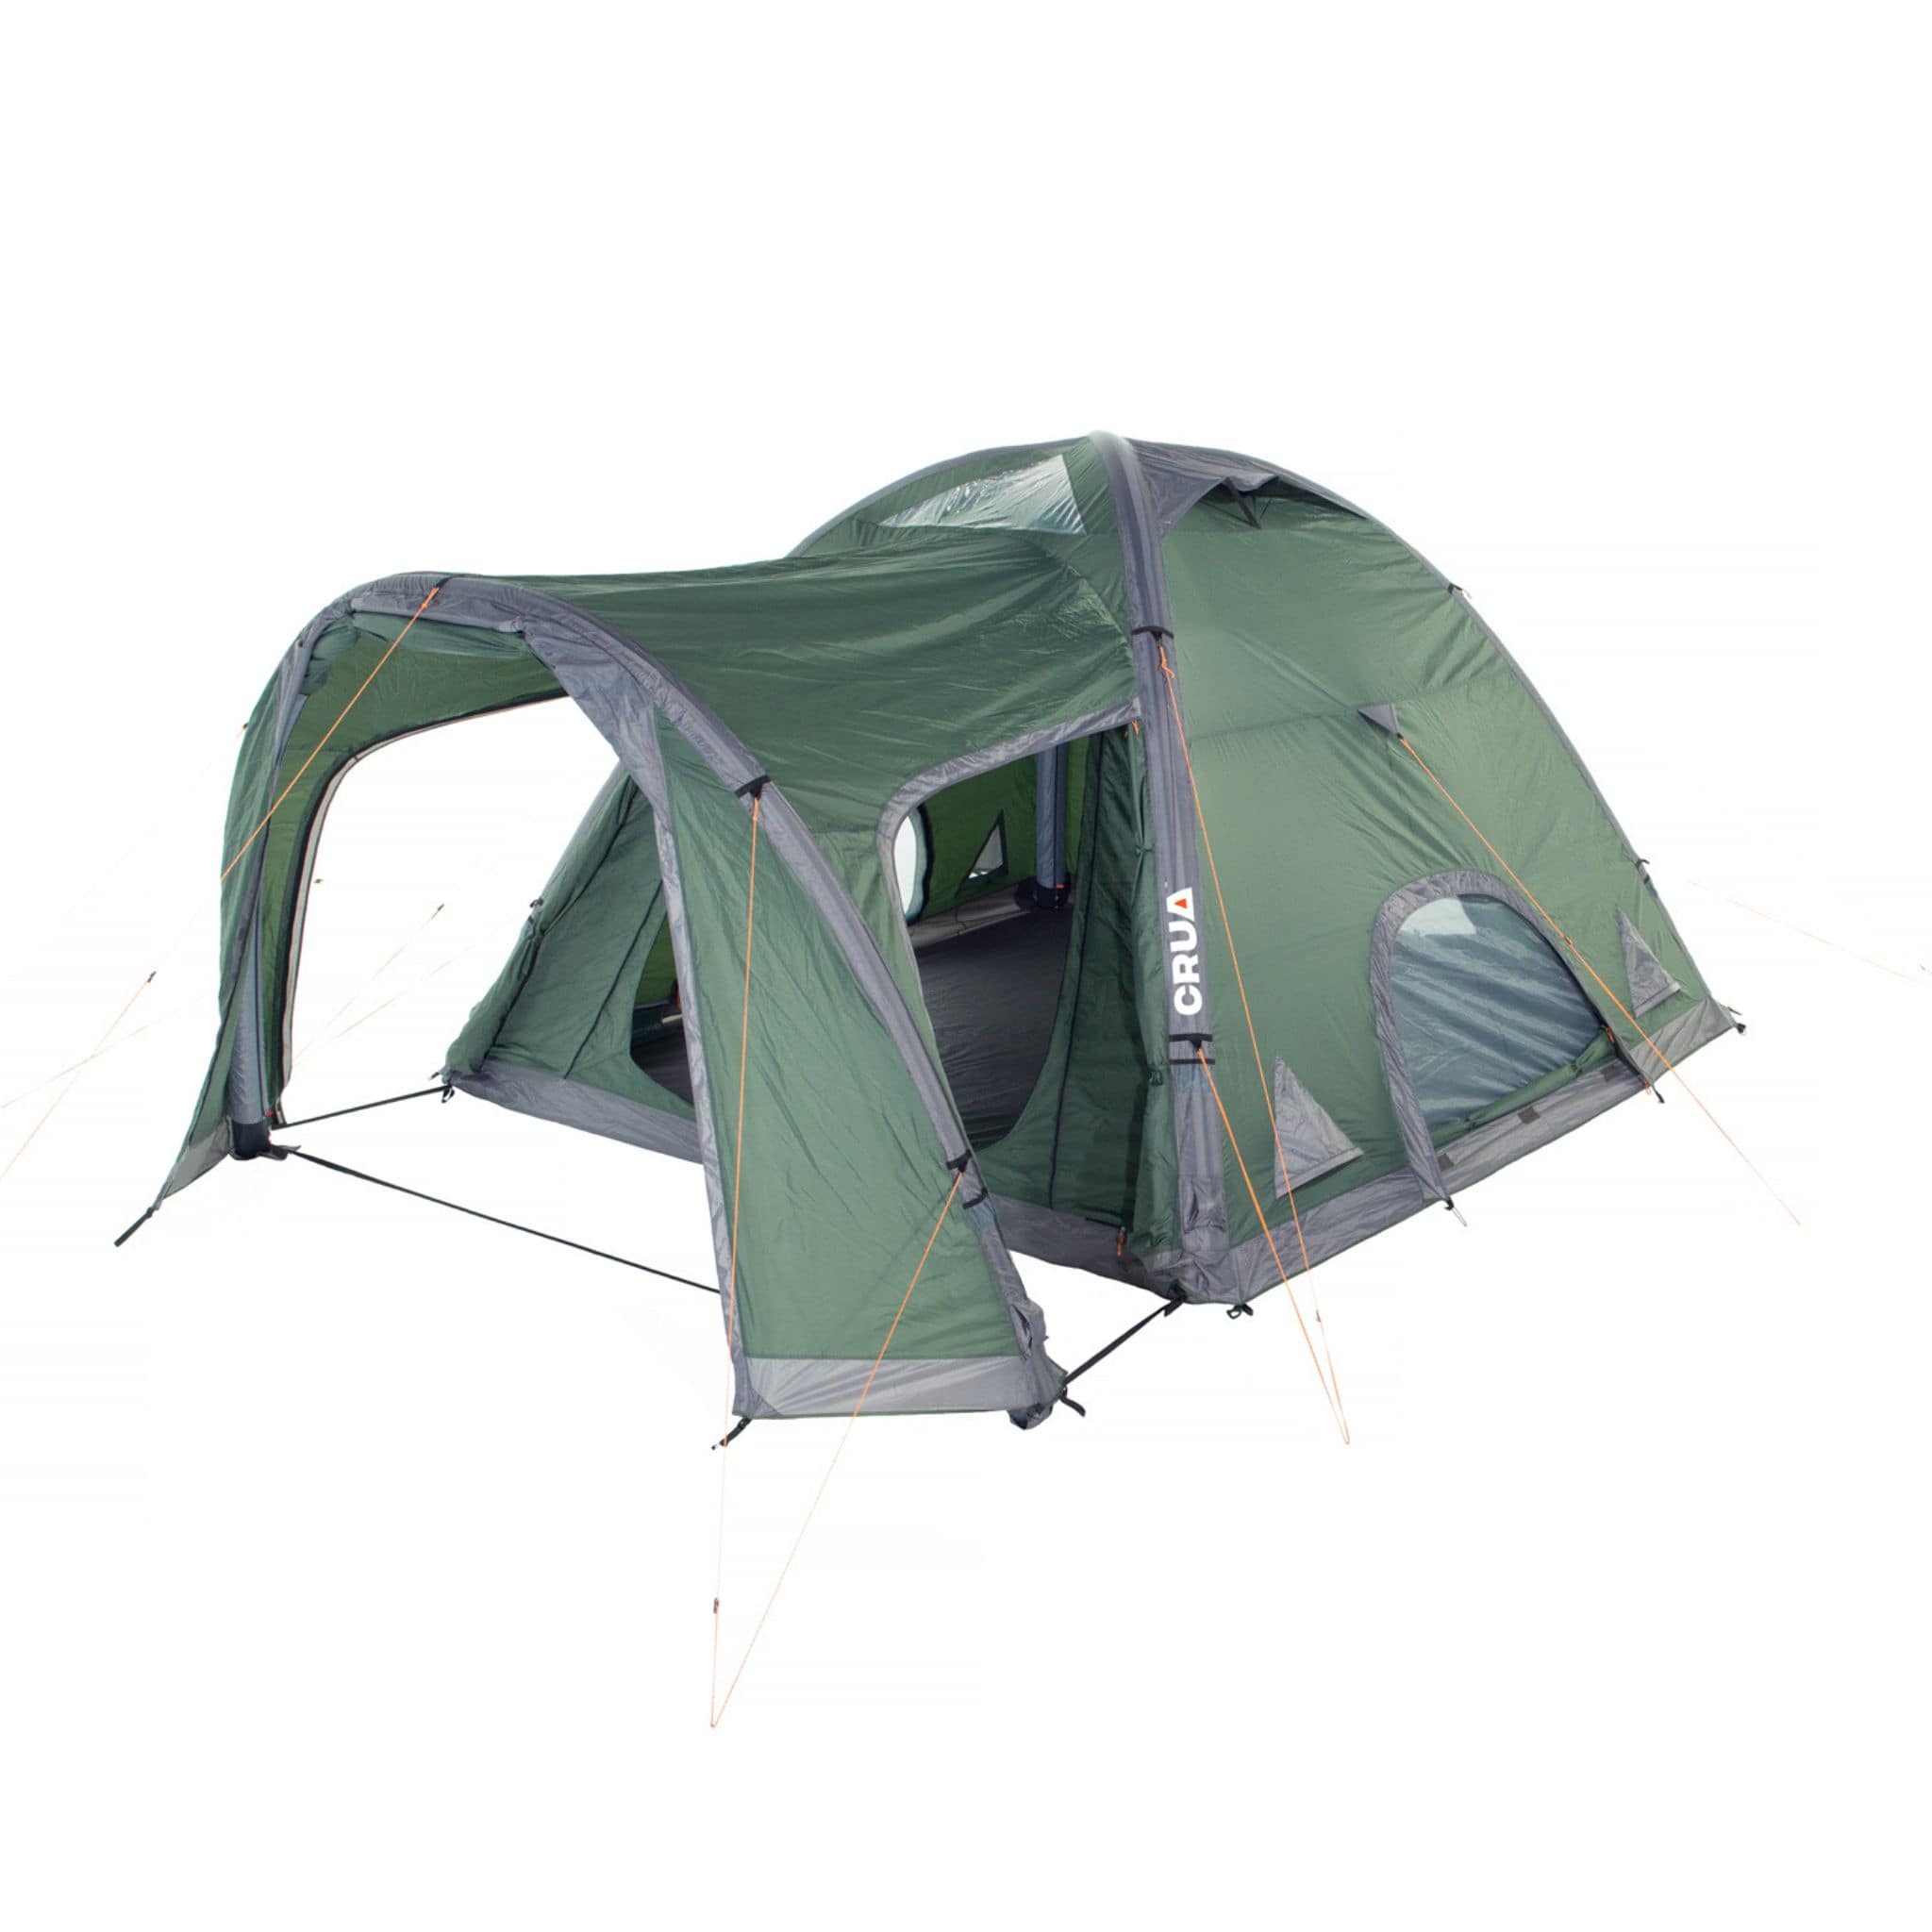 CORE| 6 PERSON CAMPING TENT - ALL WEATHER WATERPROOF SHELTER WITH ENHANCED COMFORT AND MODULAR CAMPING SYSTEM FOR ADDITIONAL TENTS